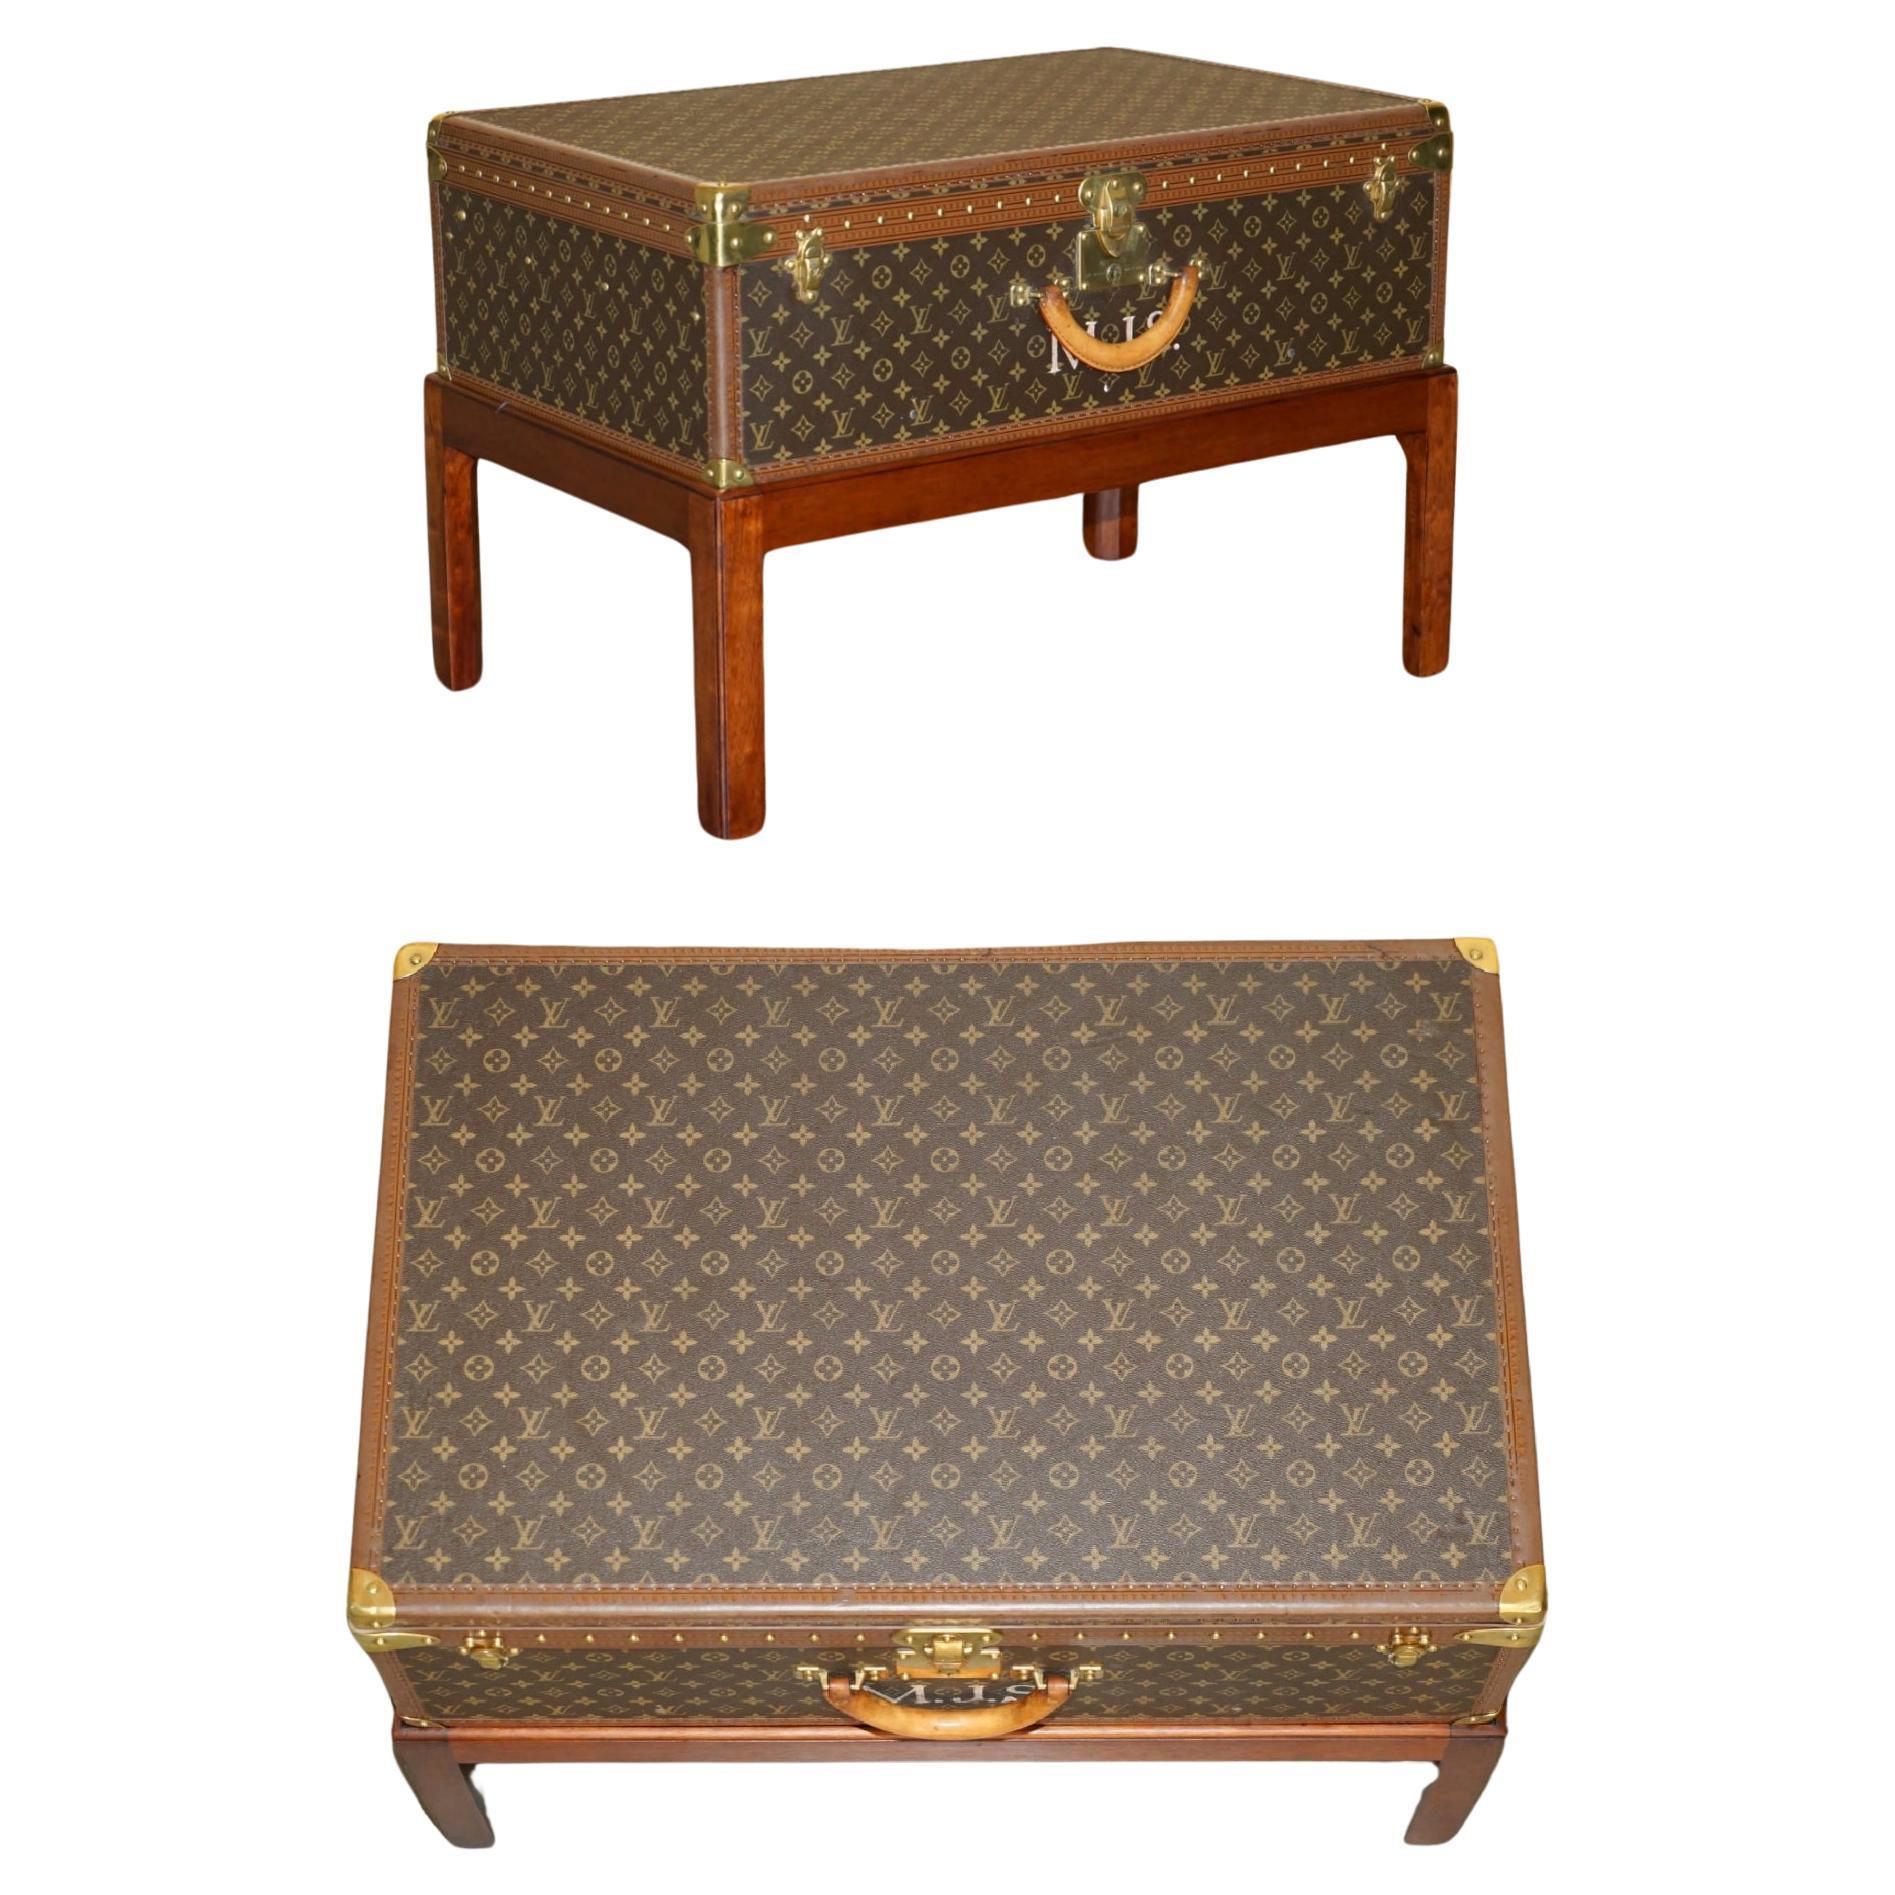 FULLY RESTORED ViNTAGE BROWN LEATHER LOUIS VUITTON SUITCASE TRUNK COFFEE TABLE